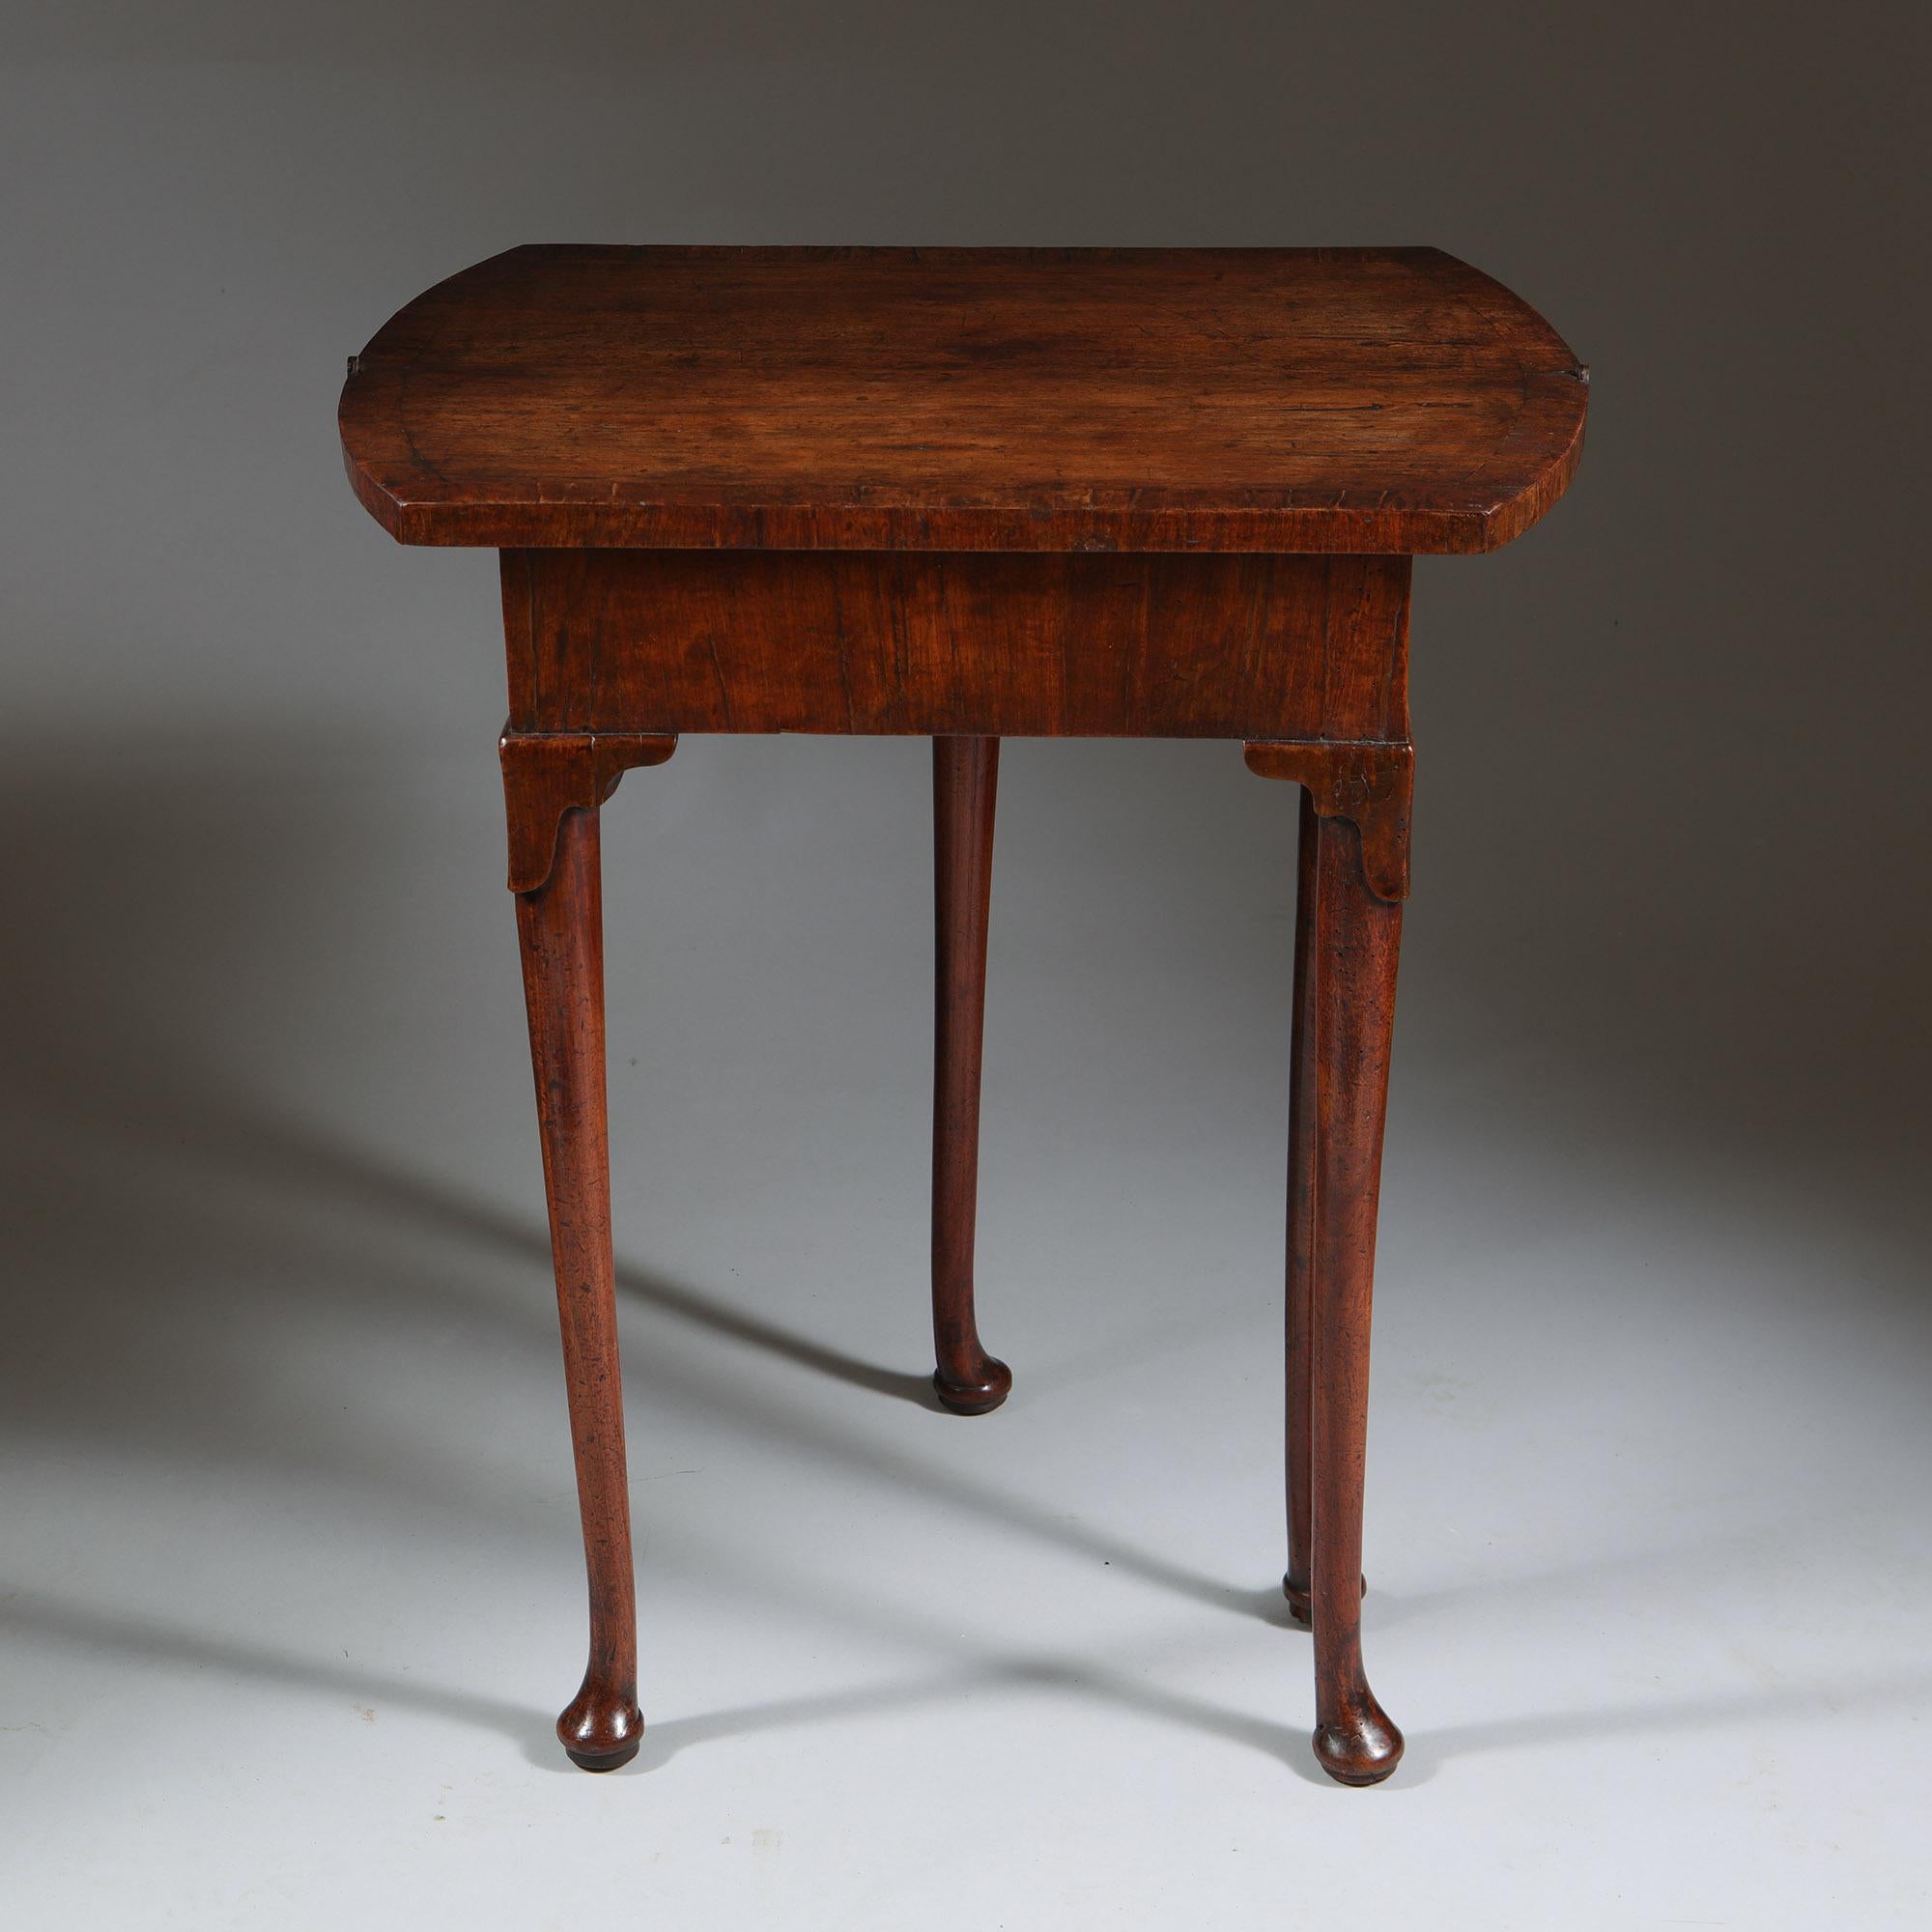 English A Unique Early 18th Century Diminutive George I Figured Walnut Bachelors Table For Sale